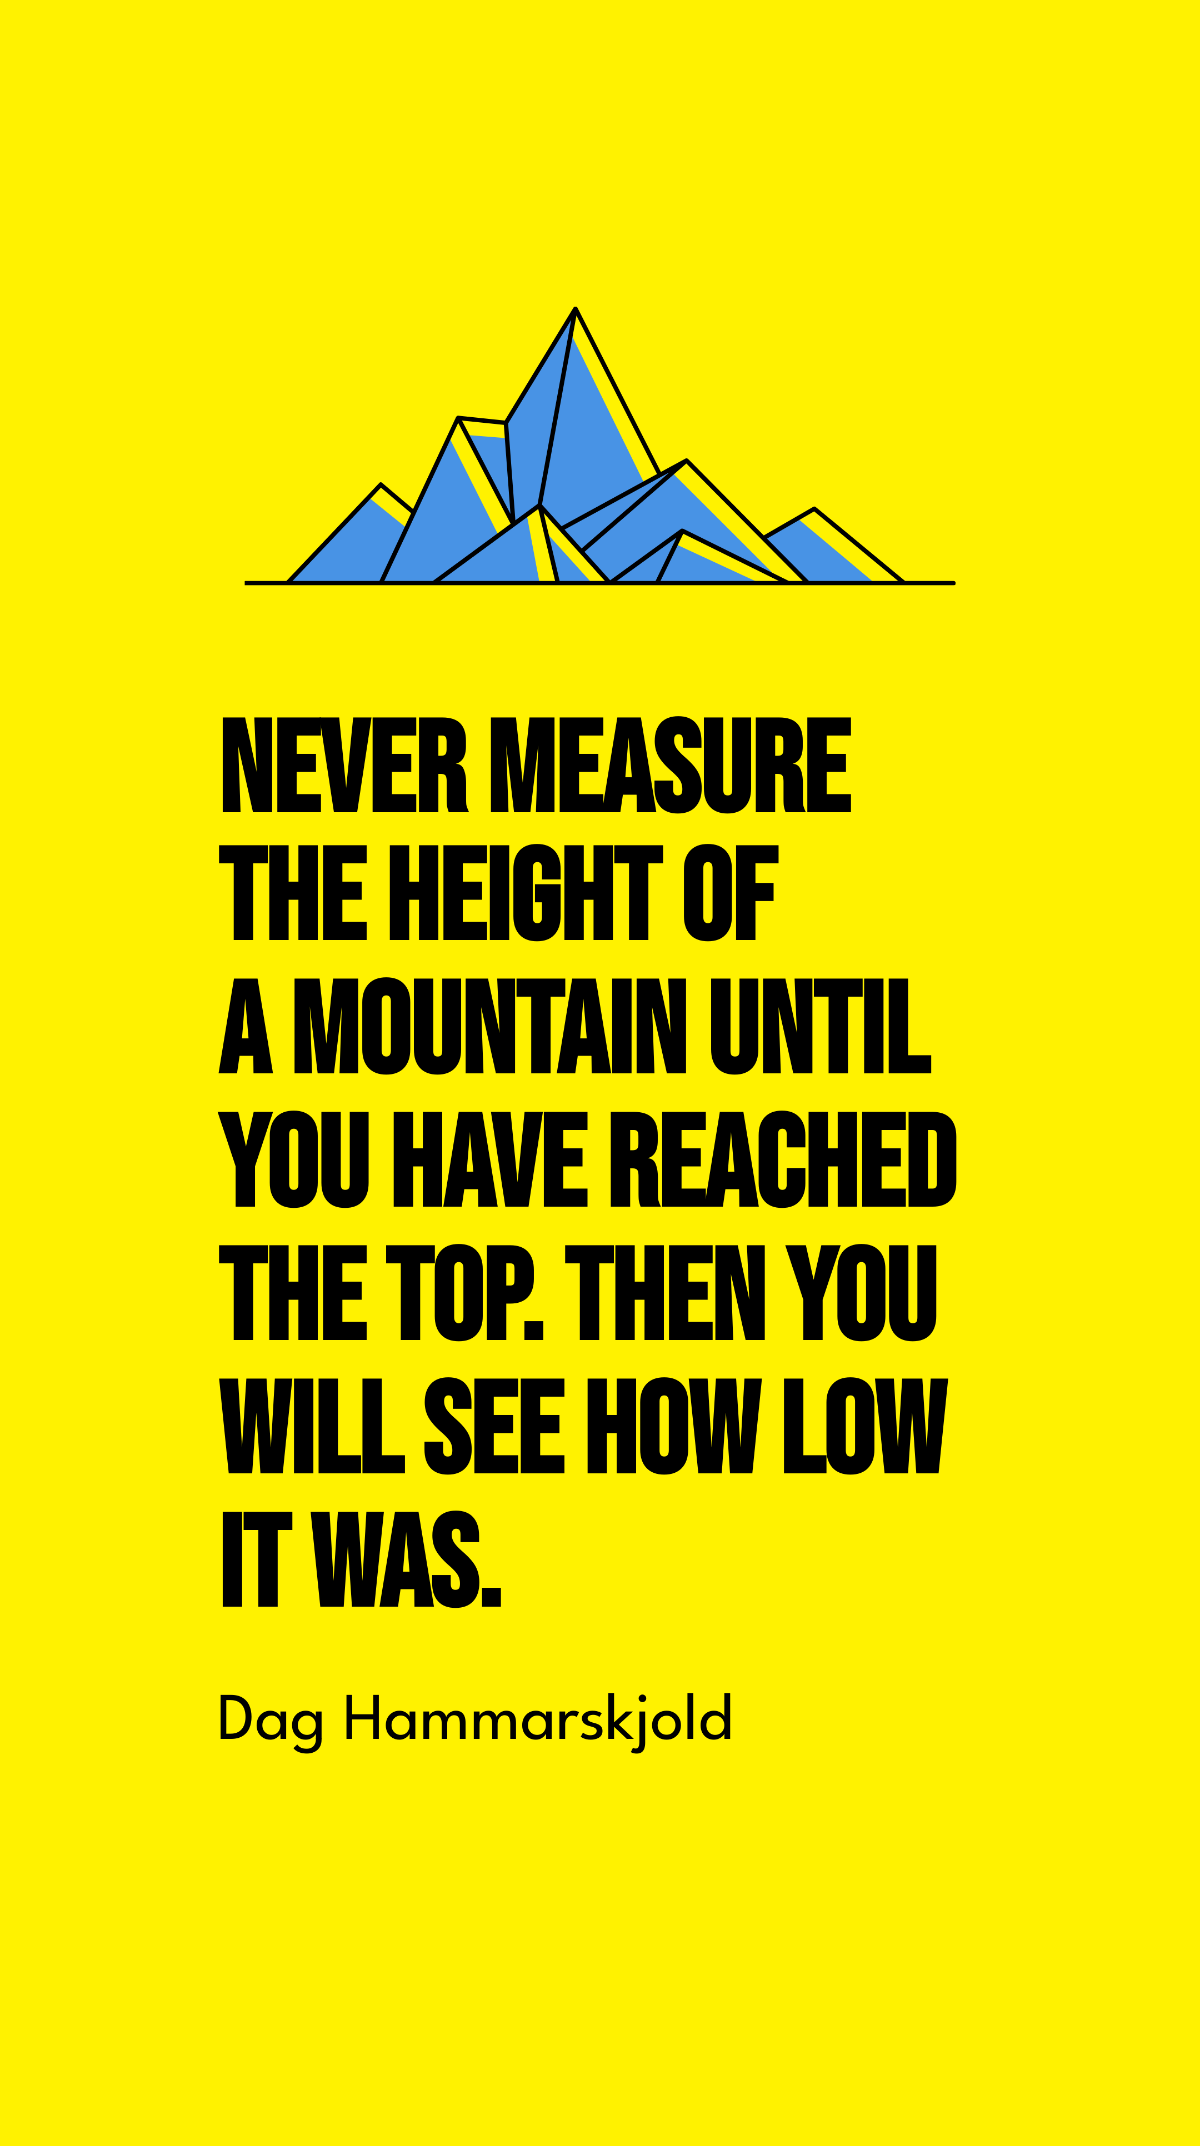 Dag Hammarskjold - Never measure the height of a mountain until you have reached the top. Then you will see how low it was. Template